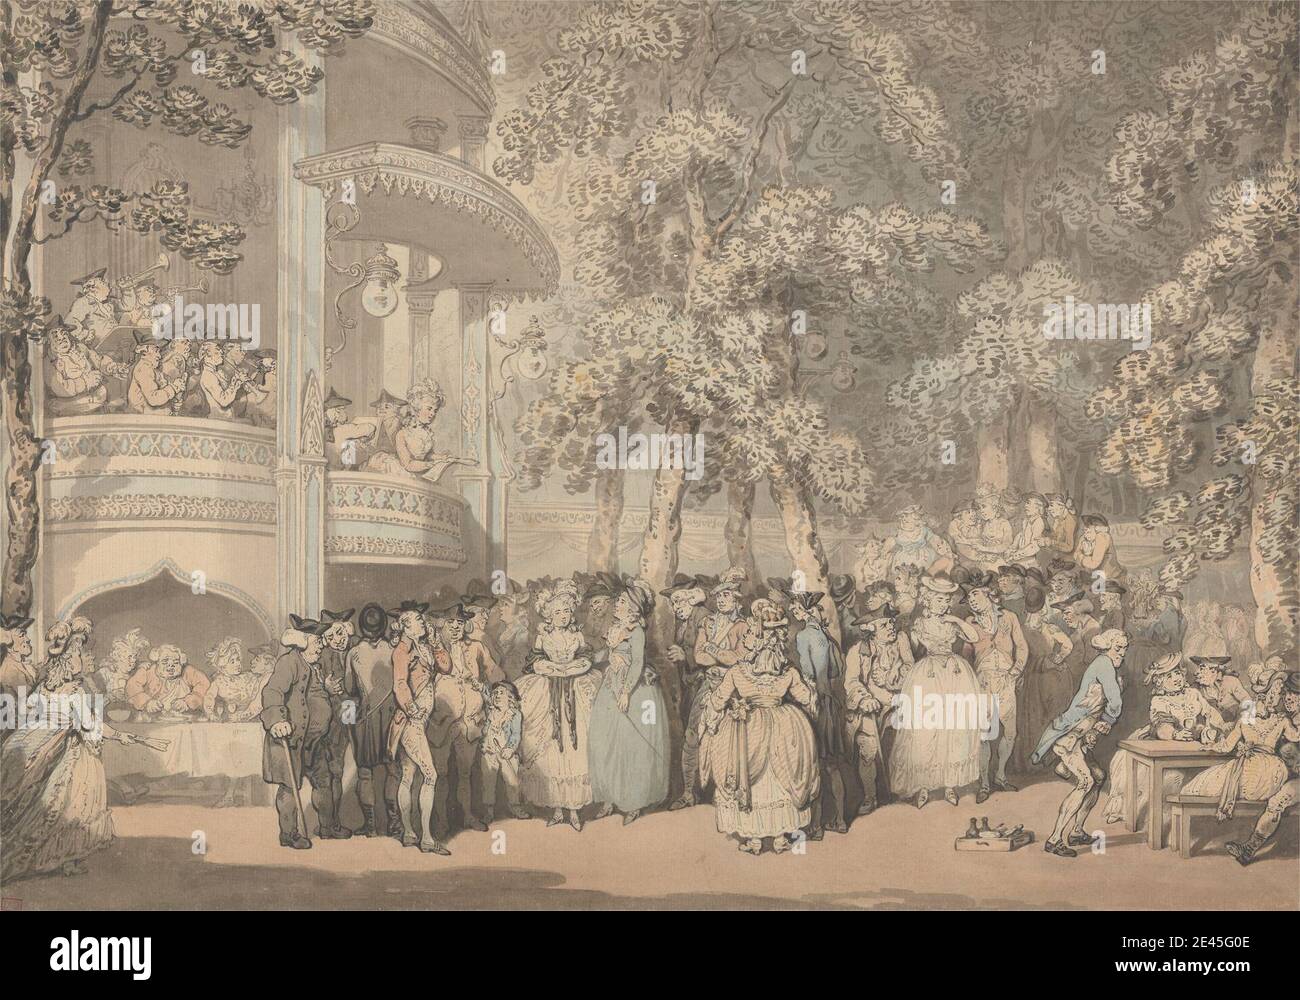 Thomas Rowlandson, 1756â€“1827, British, Vauxhall Gardens, ca. 1784. Watercolor, pen and black ink, pen and gray ink, and graphite on medium, sligtly textured, cream laid paper.   arch , audience , balcony , concert , costume , entertainment , gardens , genre subject , leisure , men , music , musical instruments , musicians , orchestra , organ , park (grounds) , performance , pleasure garden , rotunda (interior space) , satire , spectators , trees , women. England , Europe , Lambeth , London , Southwark , United Kingdom , Vauxhall Gardens Stock Photo